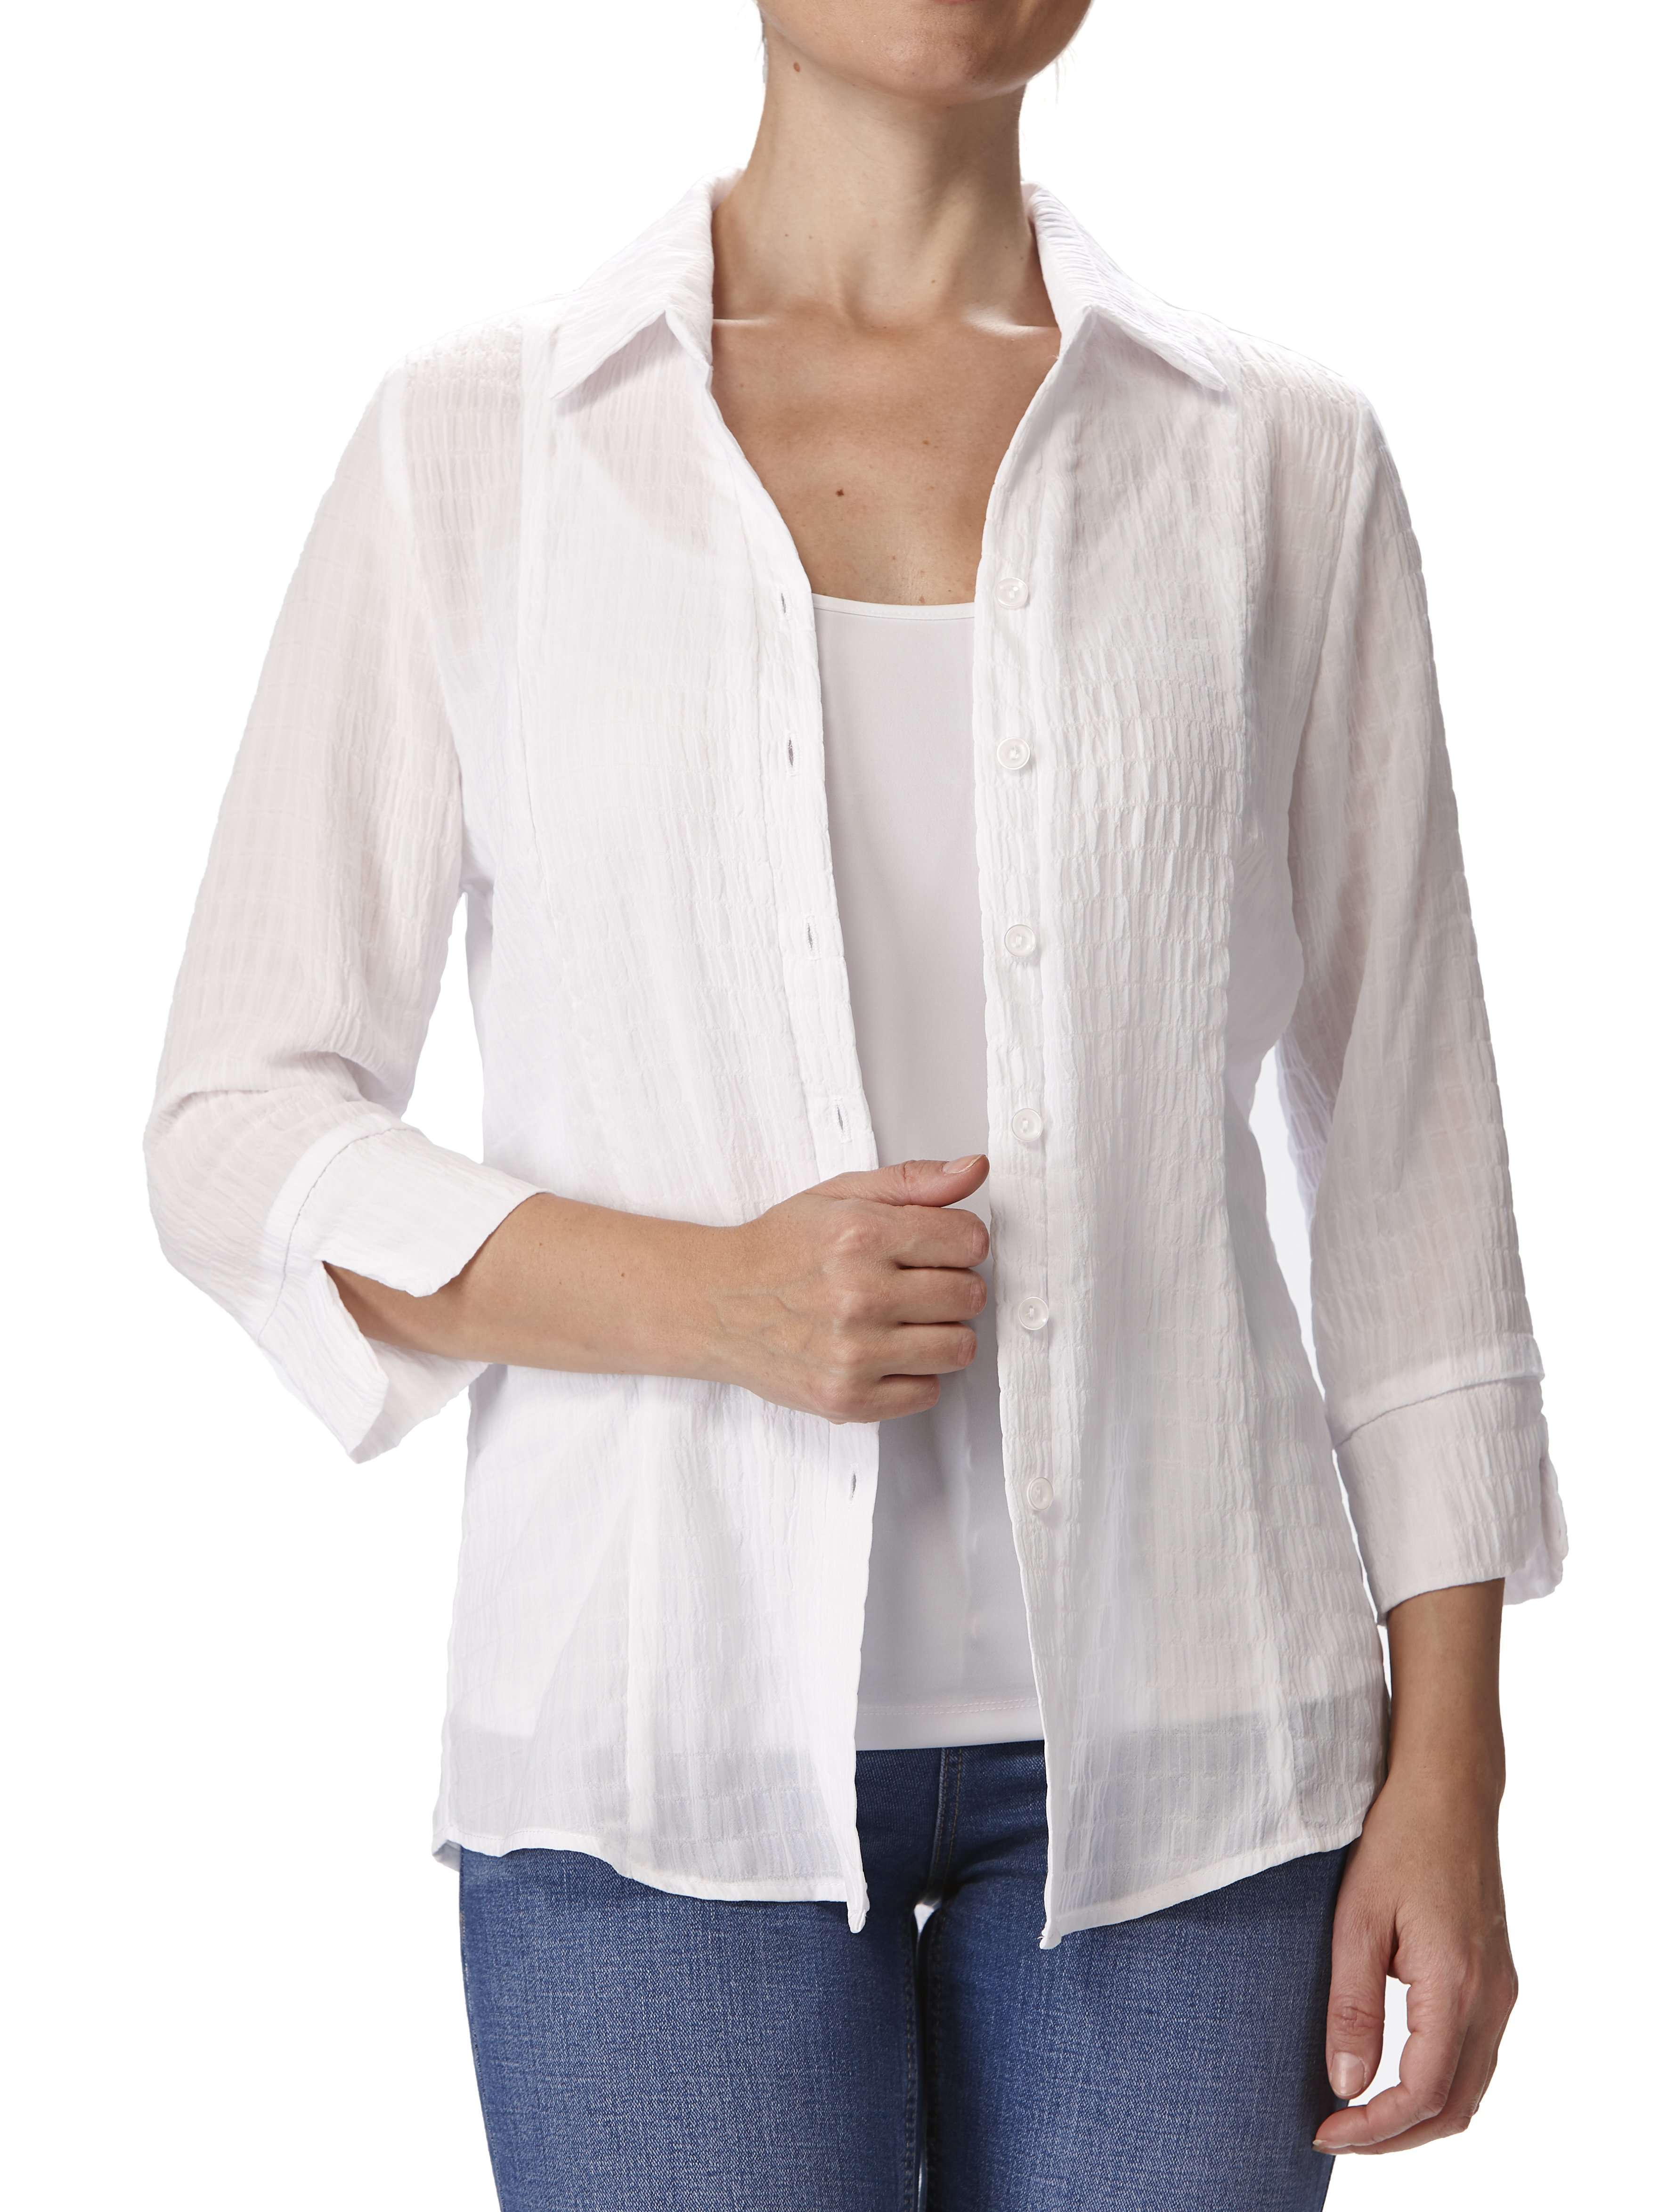 Women's Blouse White Quality Comfort Easy Care Fabric Best Selling Style Made in Canada Yvonne Marie Boutiques - Yvonne Marie - Yvonne Marie